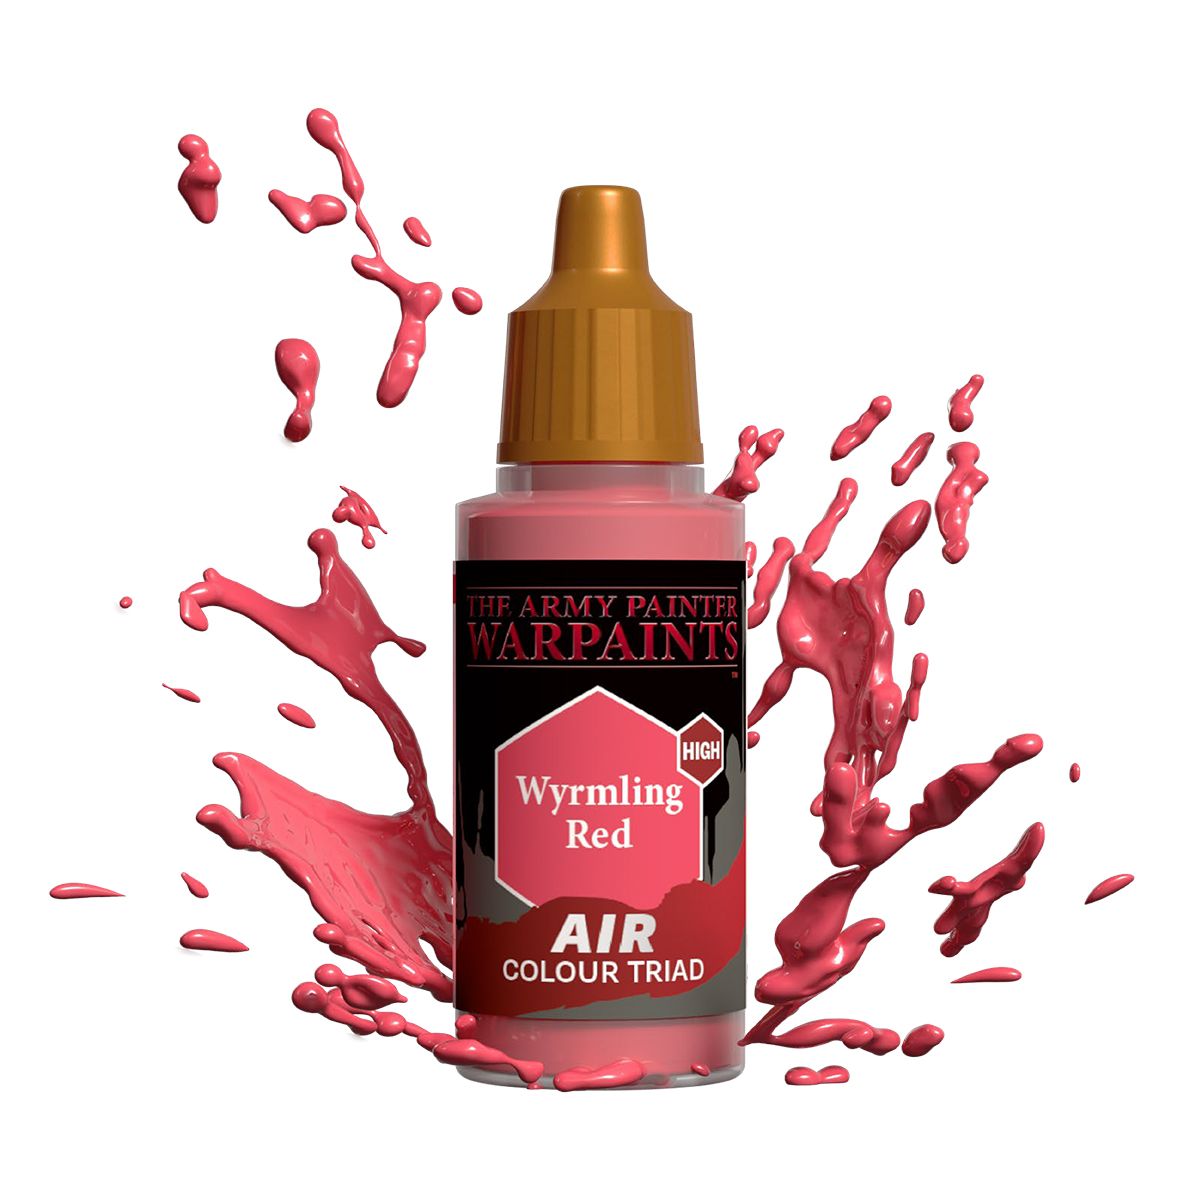 Army Painter Warpaints - Air Wyrmling Red Acrylic Paint 18ml